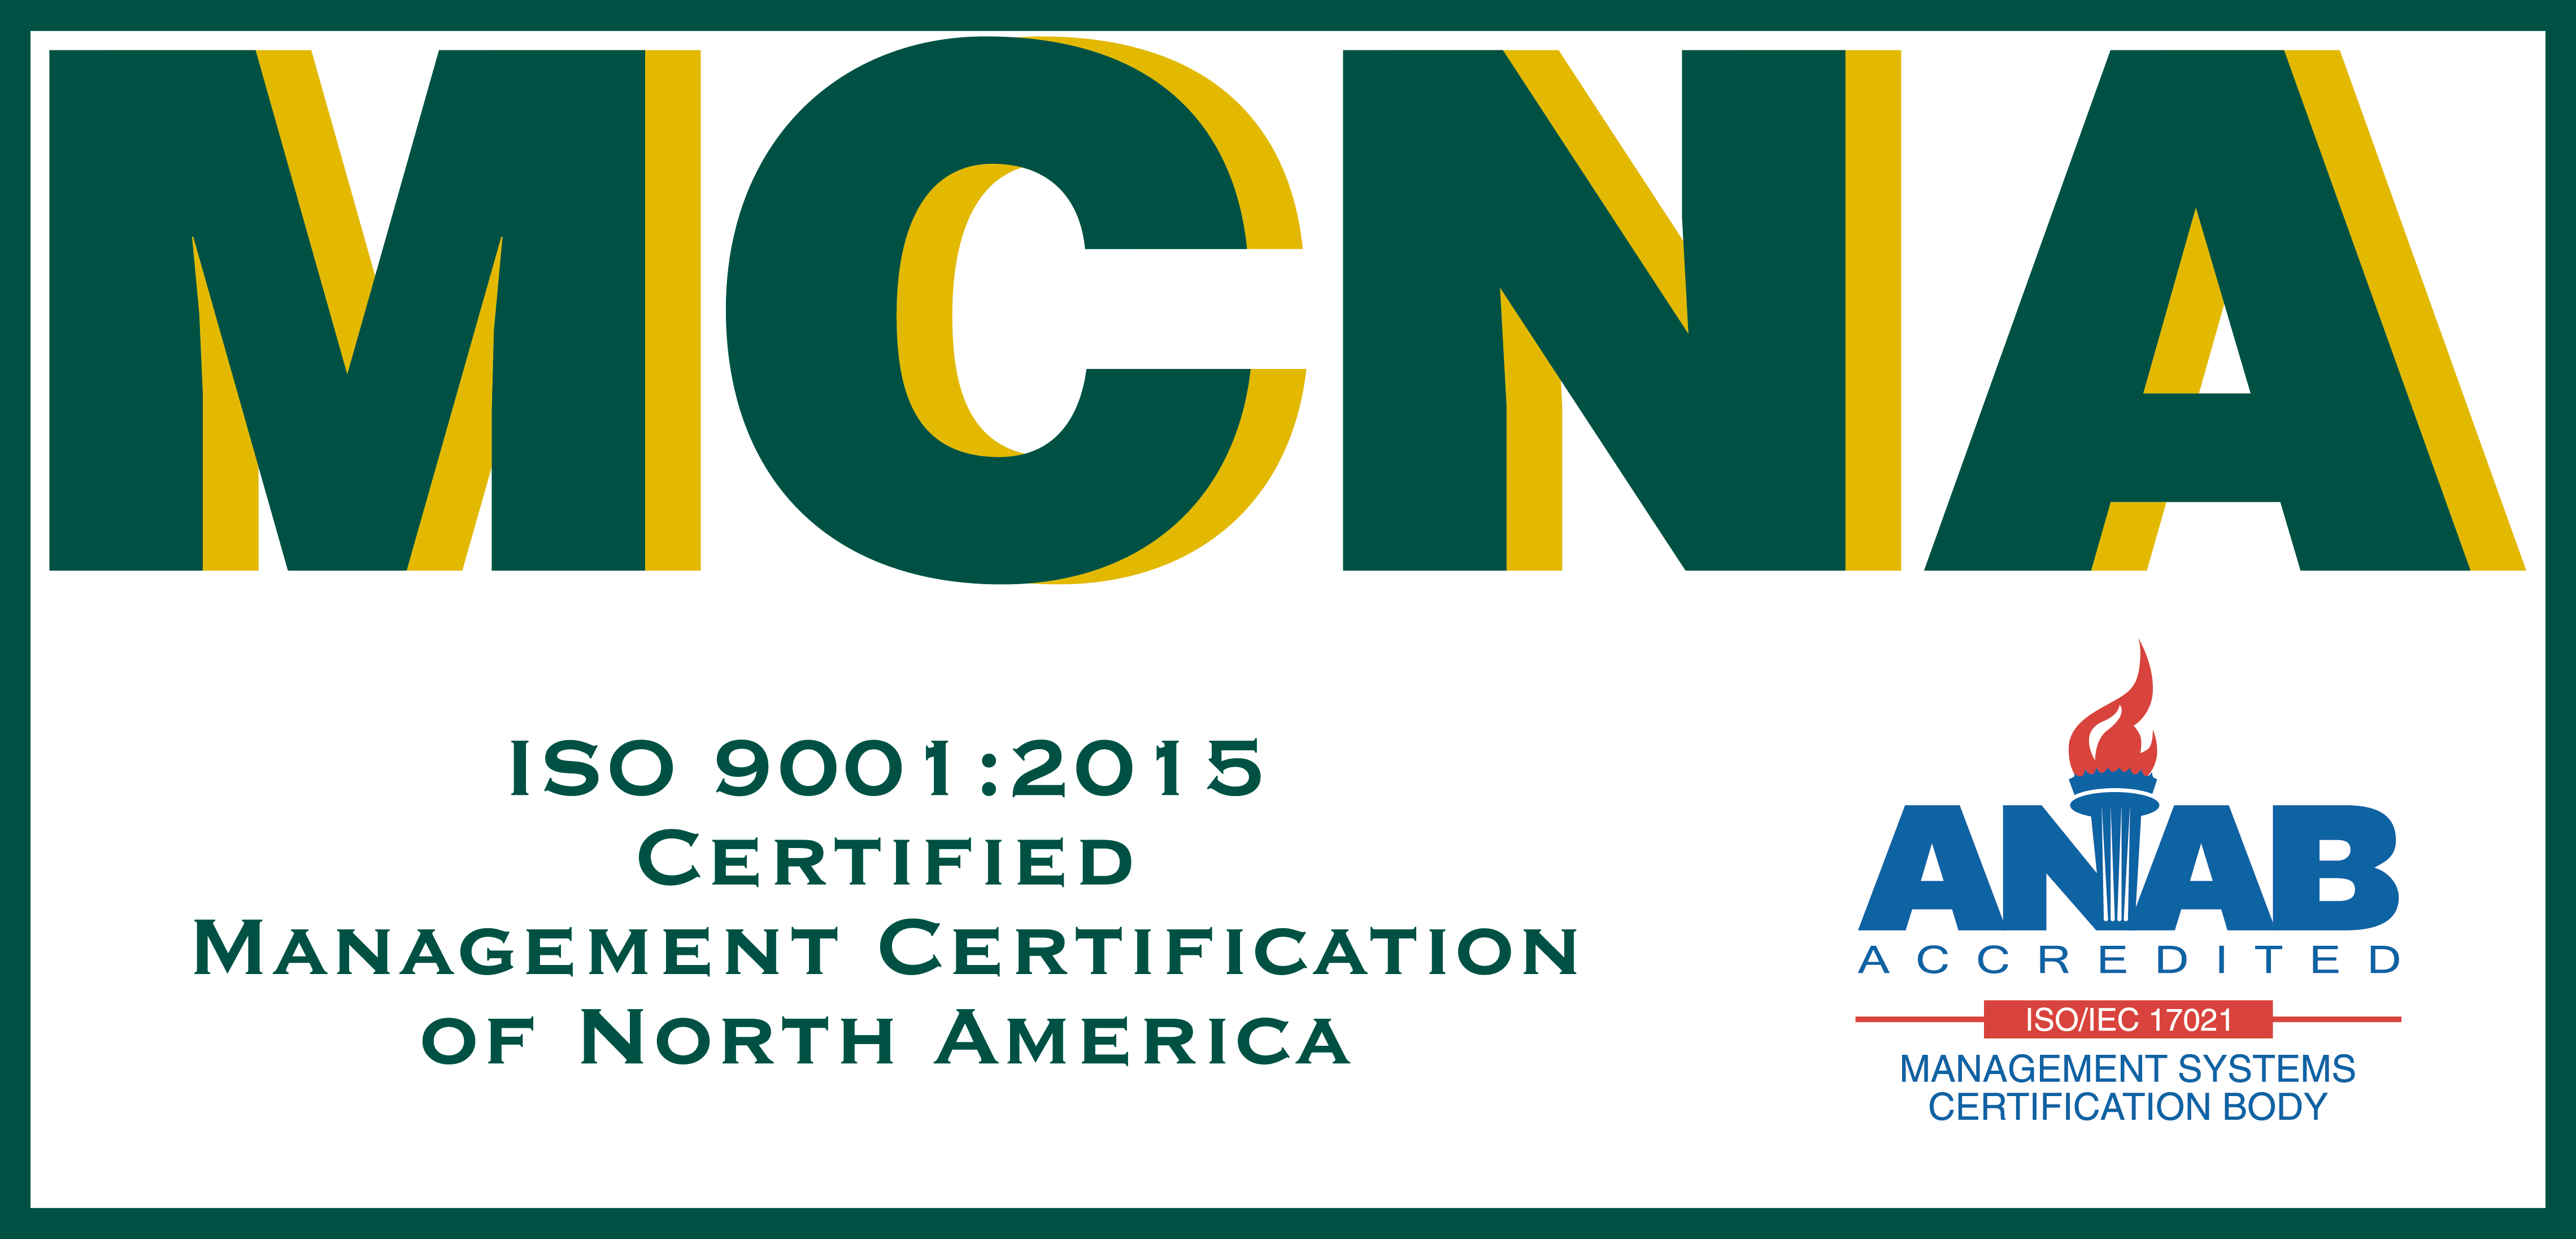 ECT is ISO 9001:2008 CERTIFIED